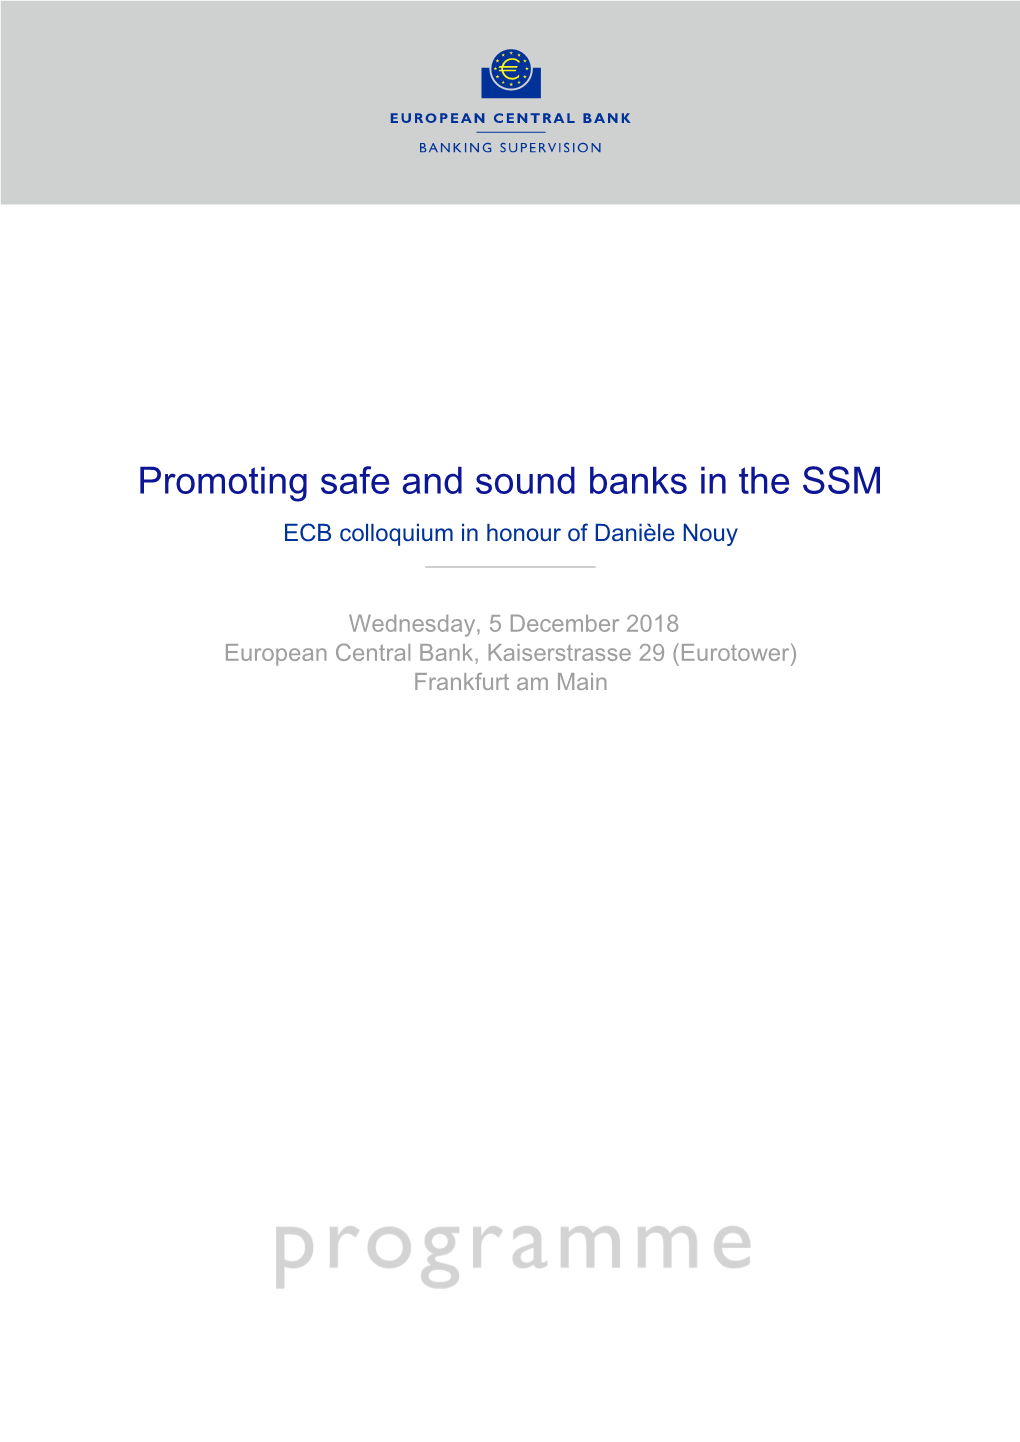 Promoting Safe and Sound Banks in the SSM Programme